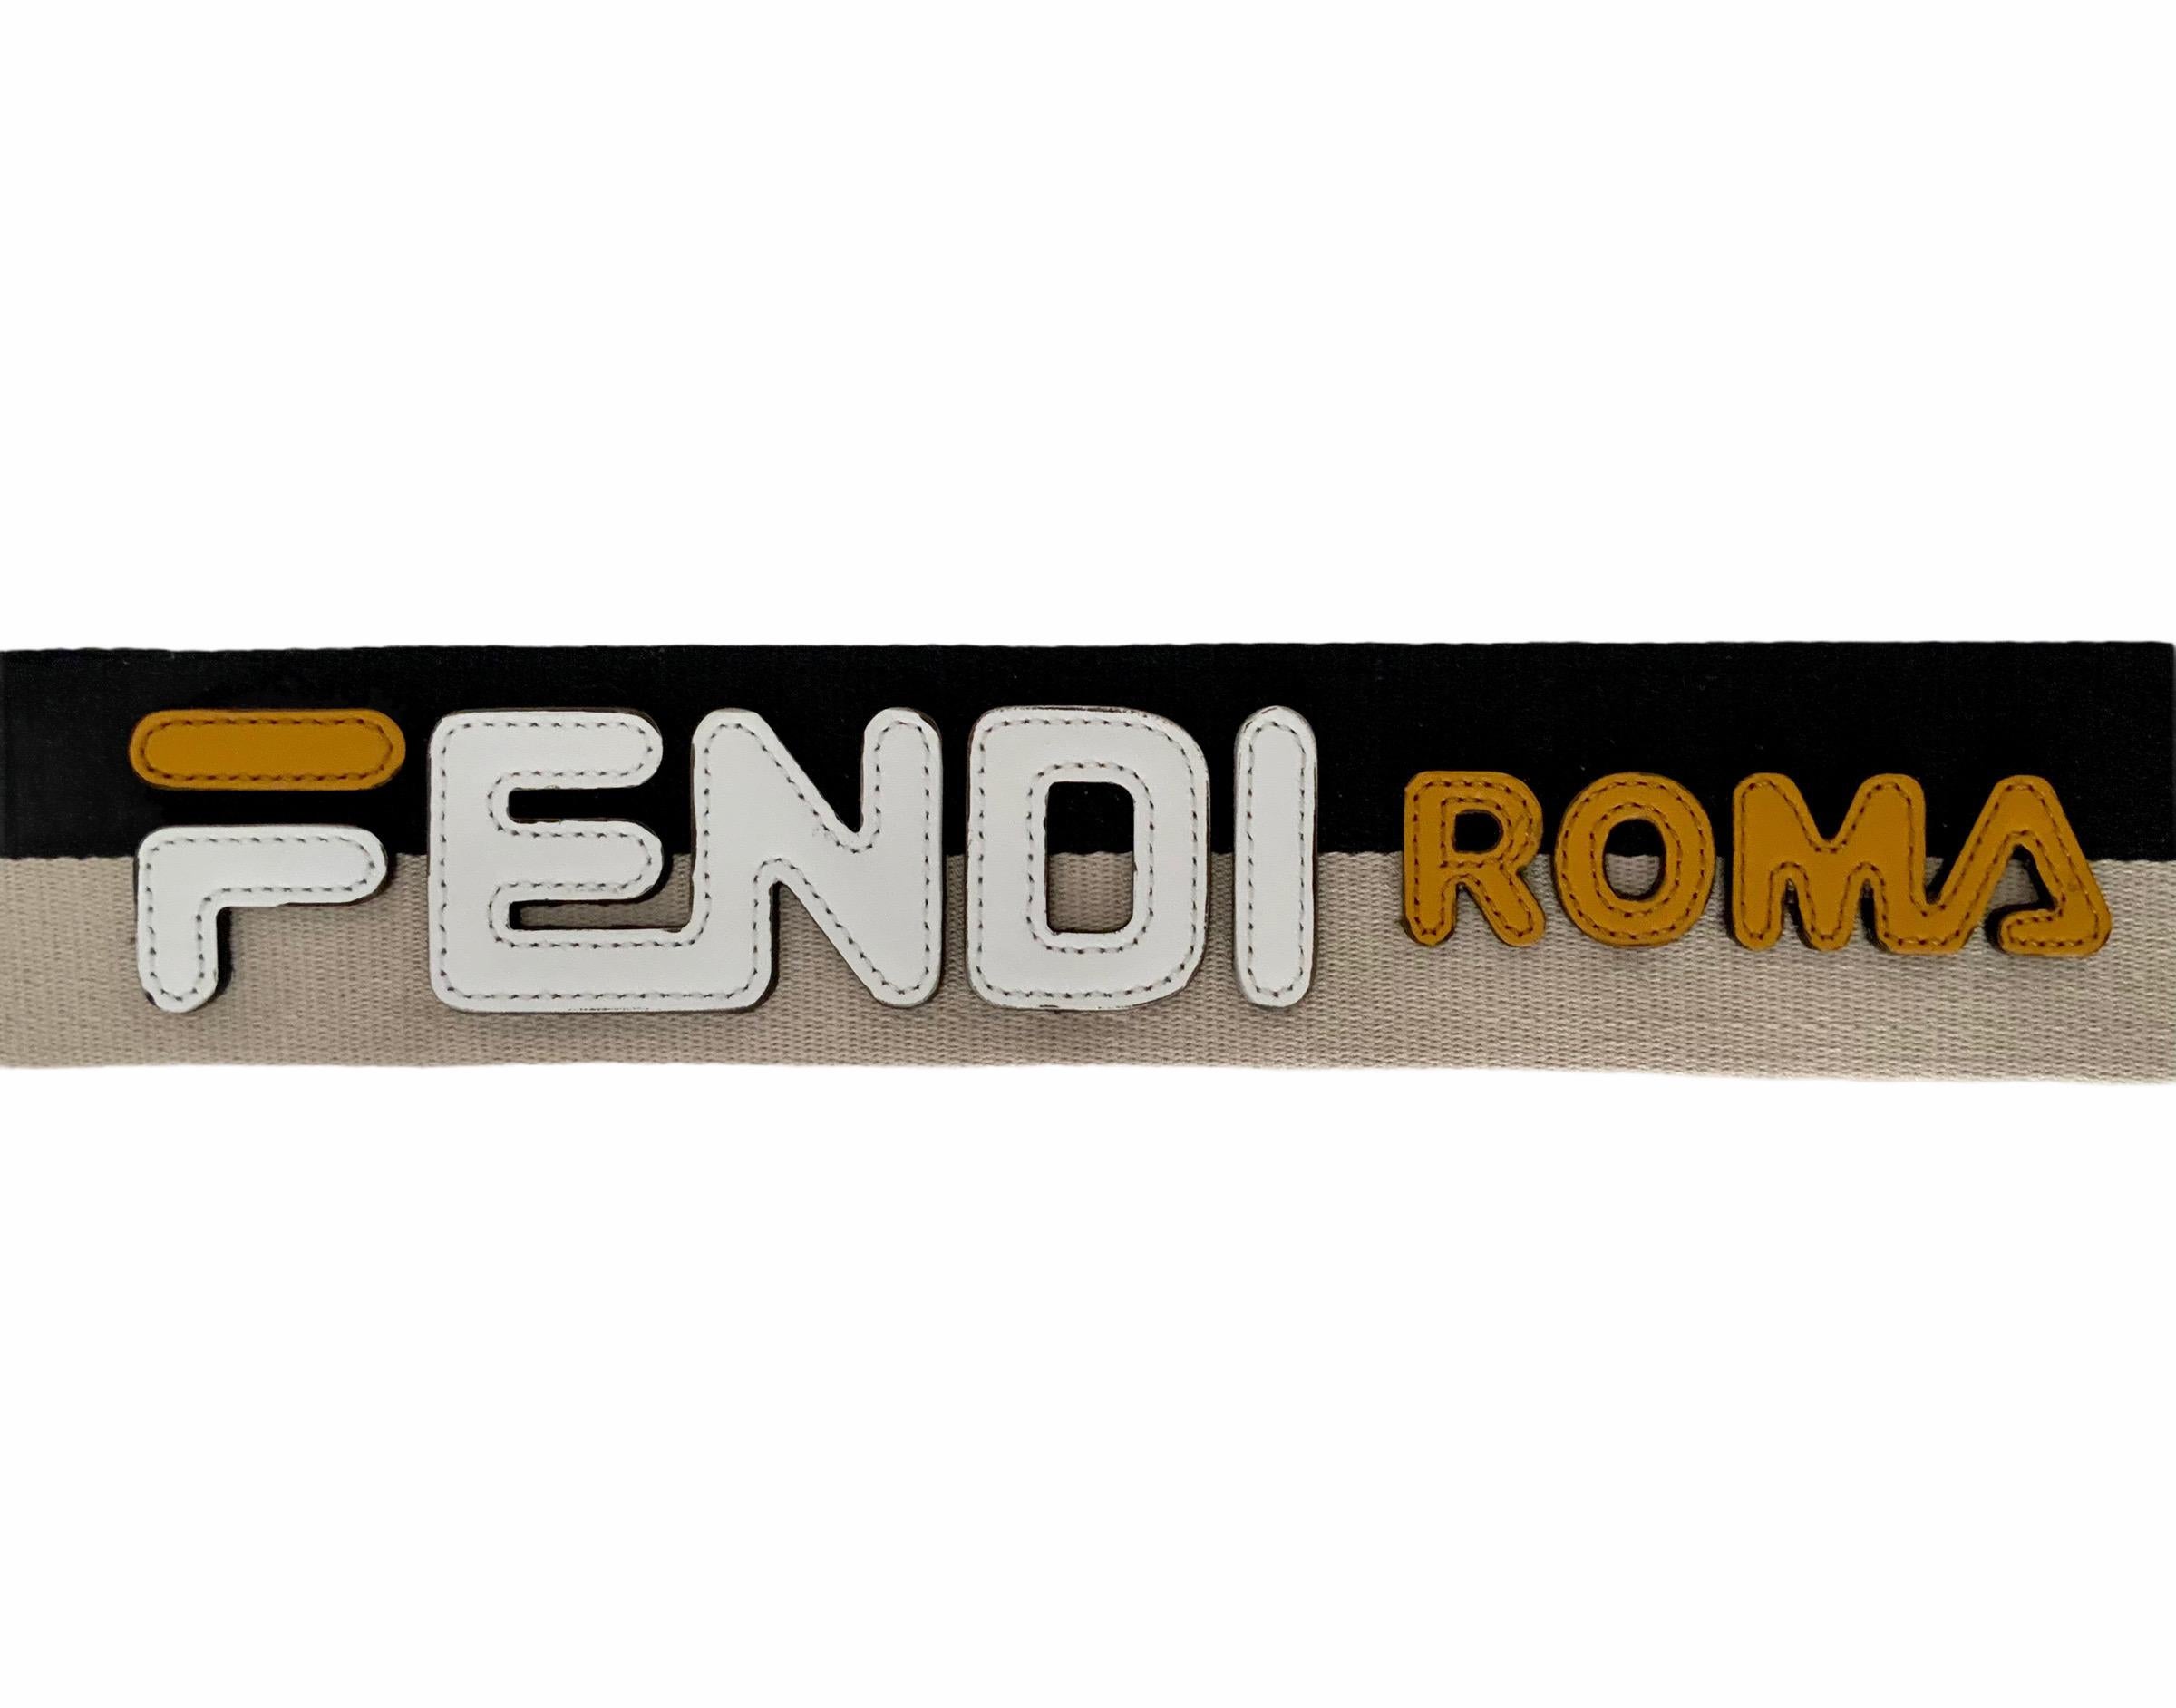 This pre-owned but new canvas strap from Fendi features a leather logo detail and goldtone double spring clips.
It can be used for a variety of handbags.

Collection: Strap You
Material: canvas, leather
Color: beige, black
Hardware: gold-tone